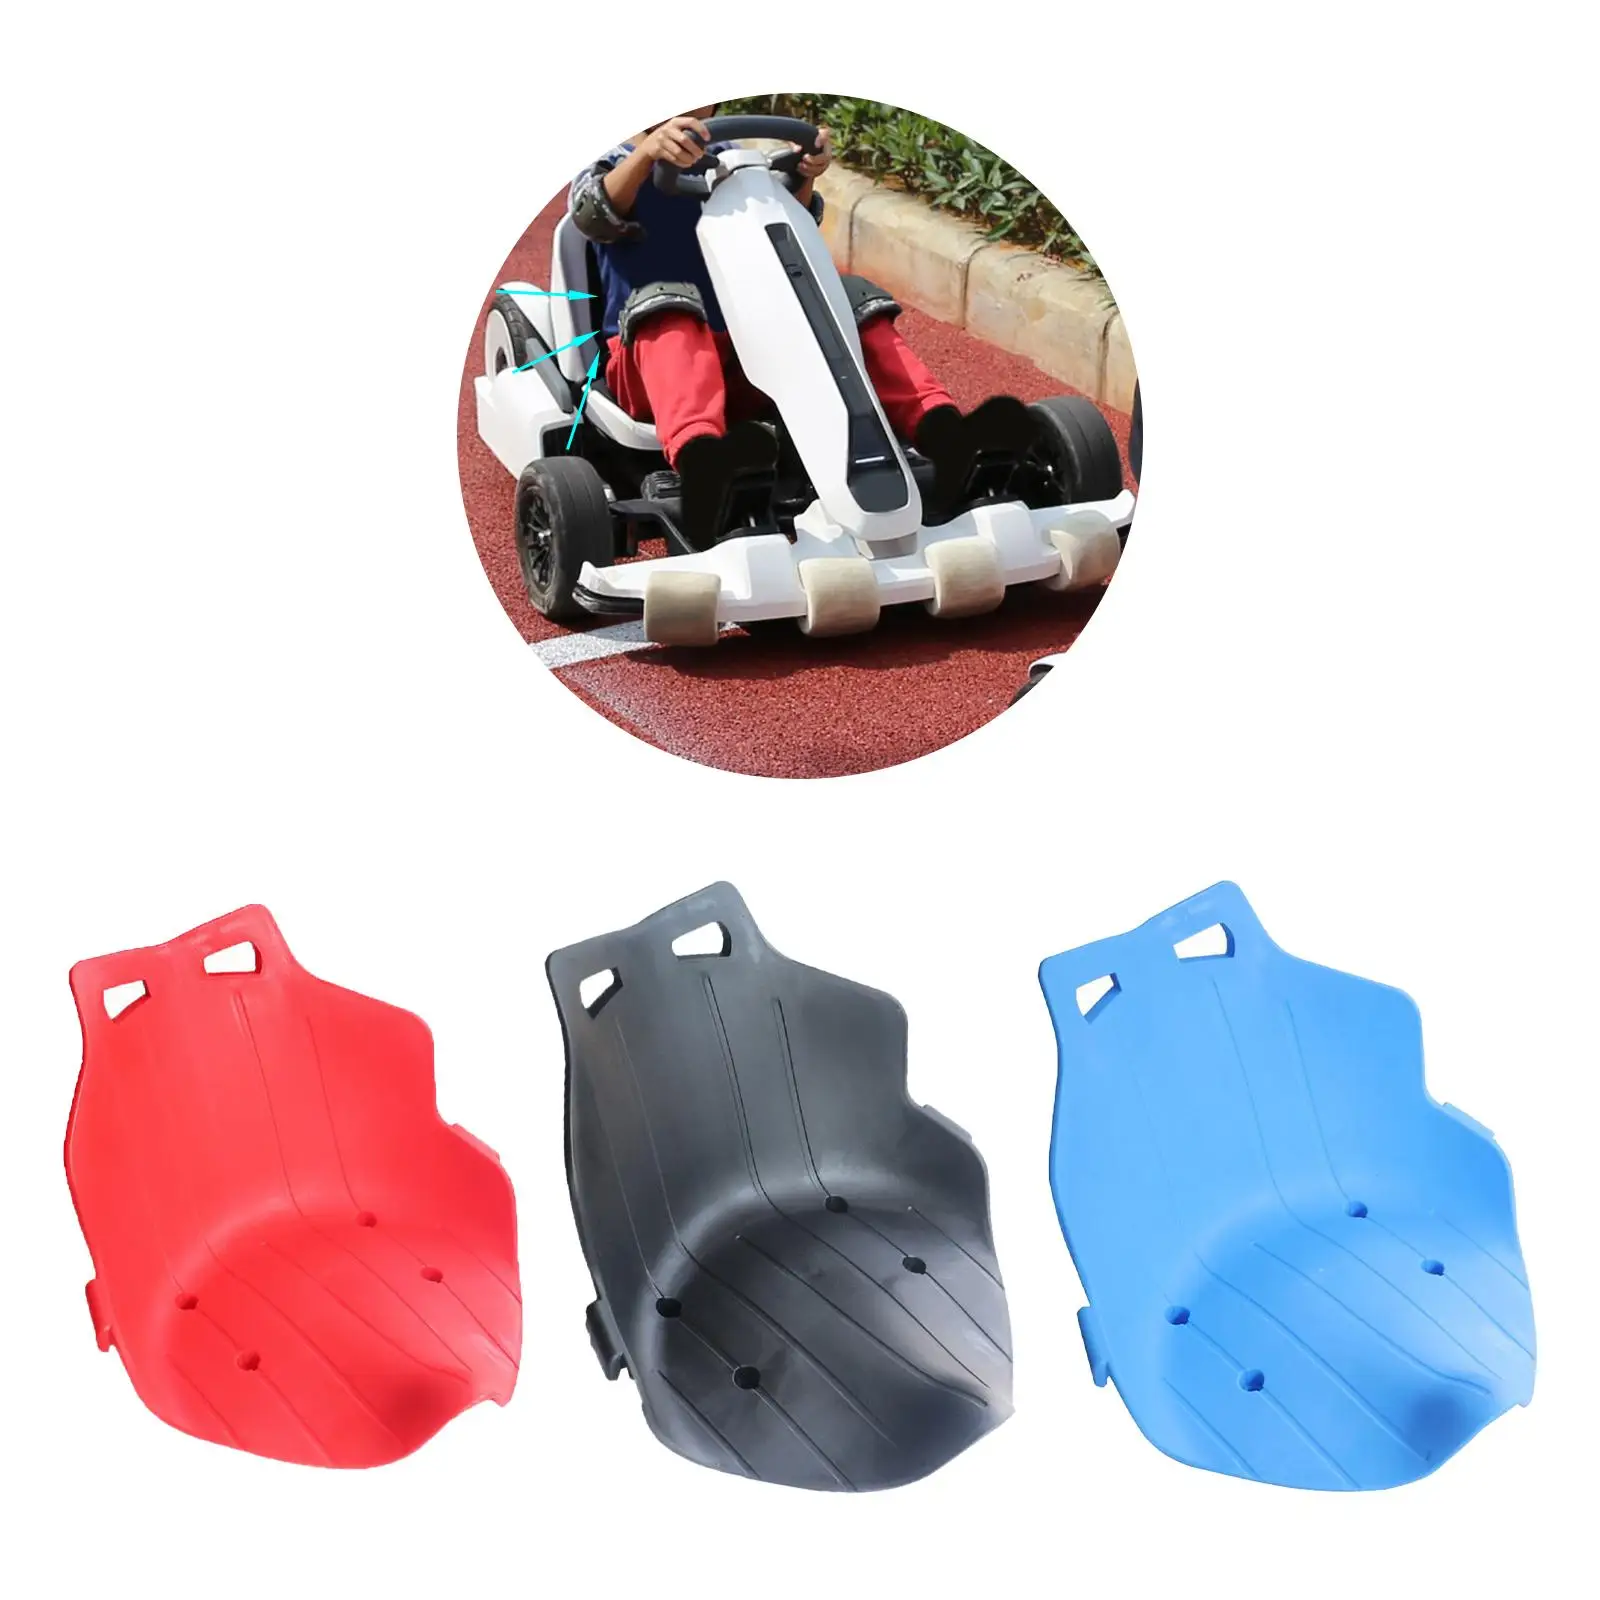 Kids Seat Accessories, Durable for Cart Cart Seat Saddle DIY Go Kart Seat Saddle Trikes Seat Saddle